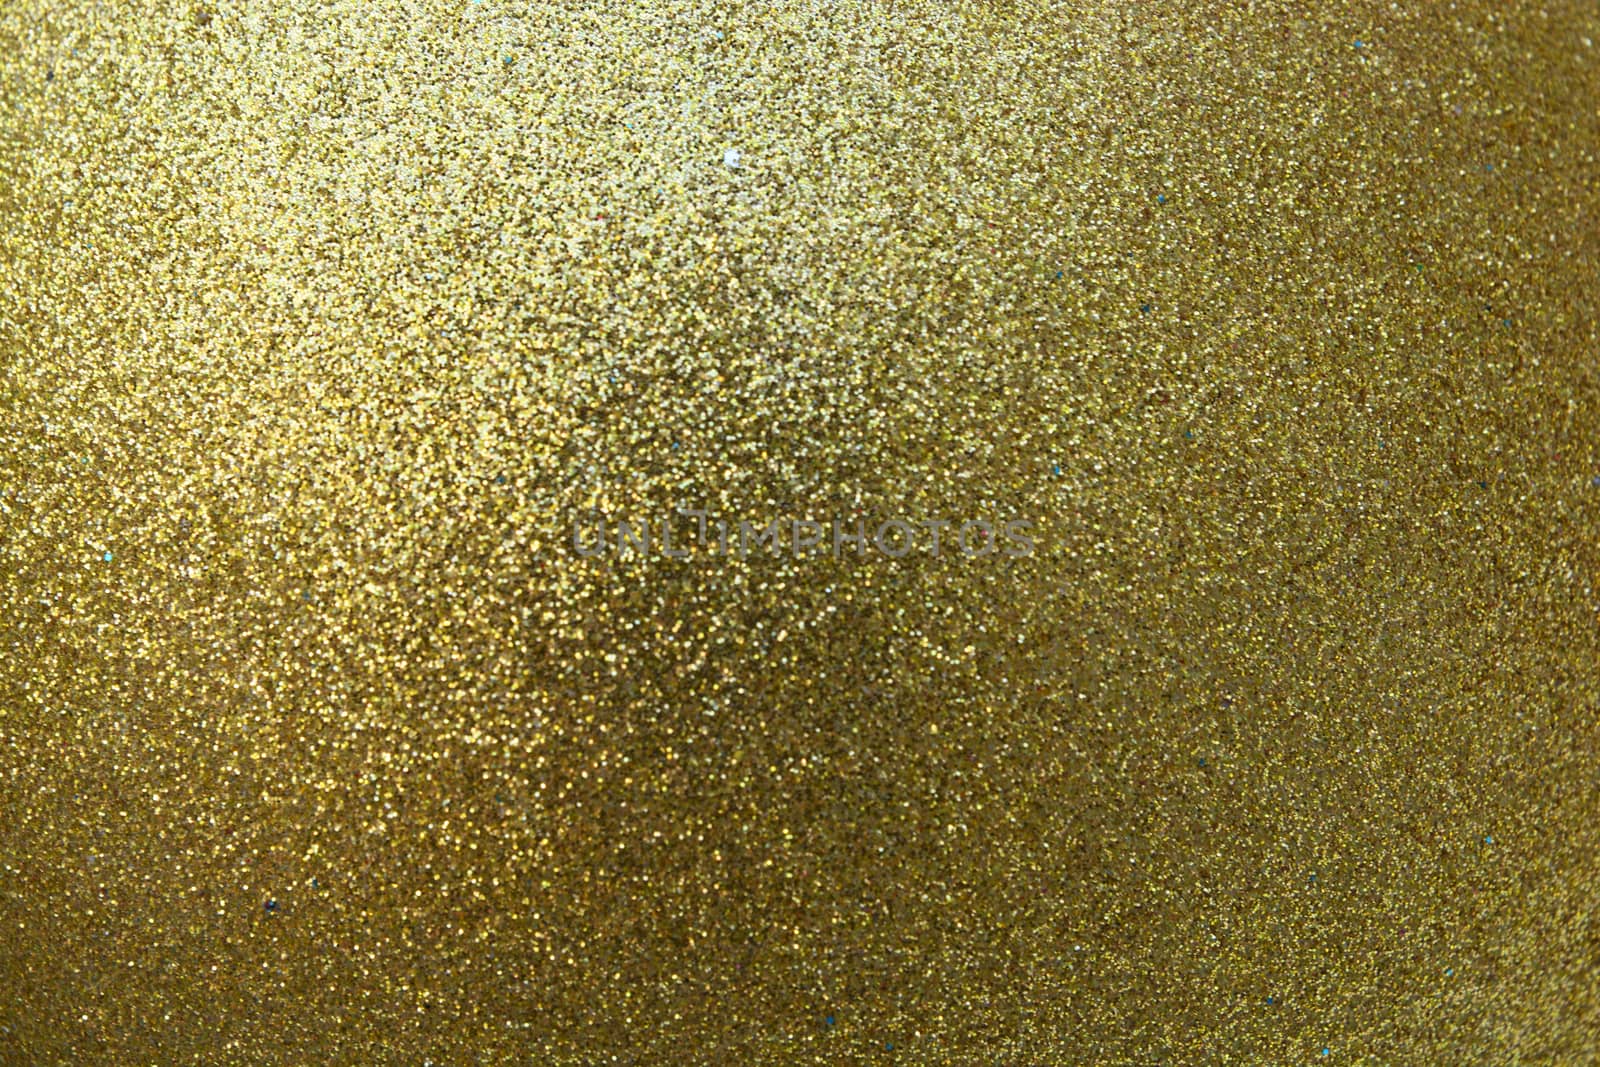 Gold  texture background